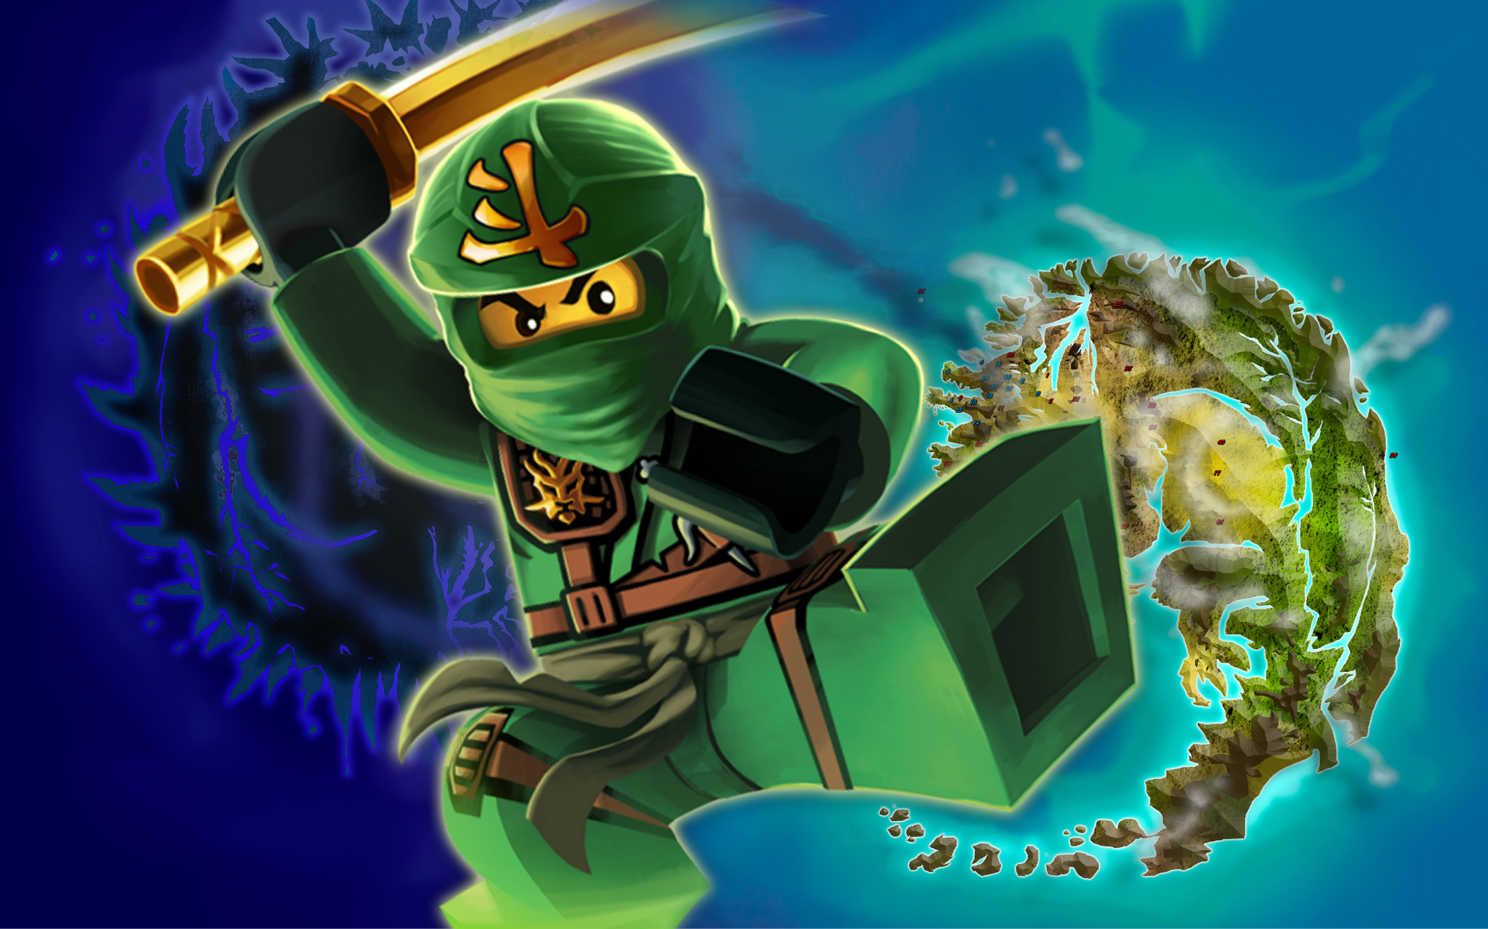 You Can Download Lego Ninjago In Your Computer By Clicking Lloyd Cake Topper HD Wallpaper